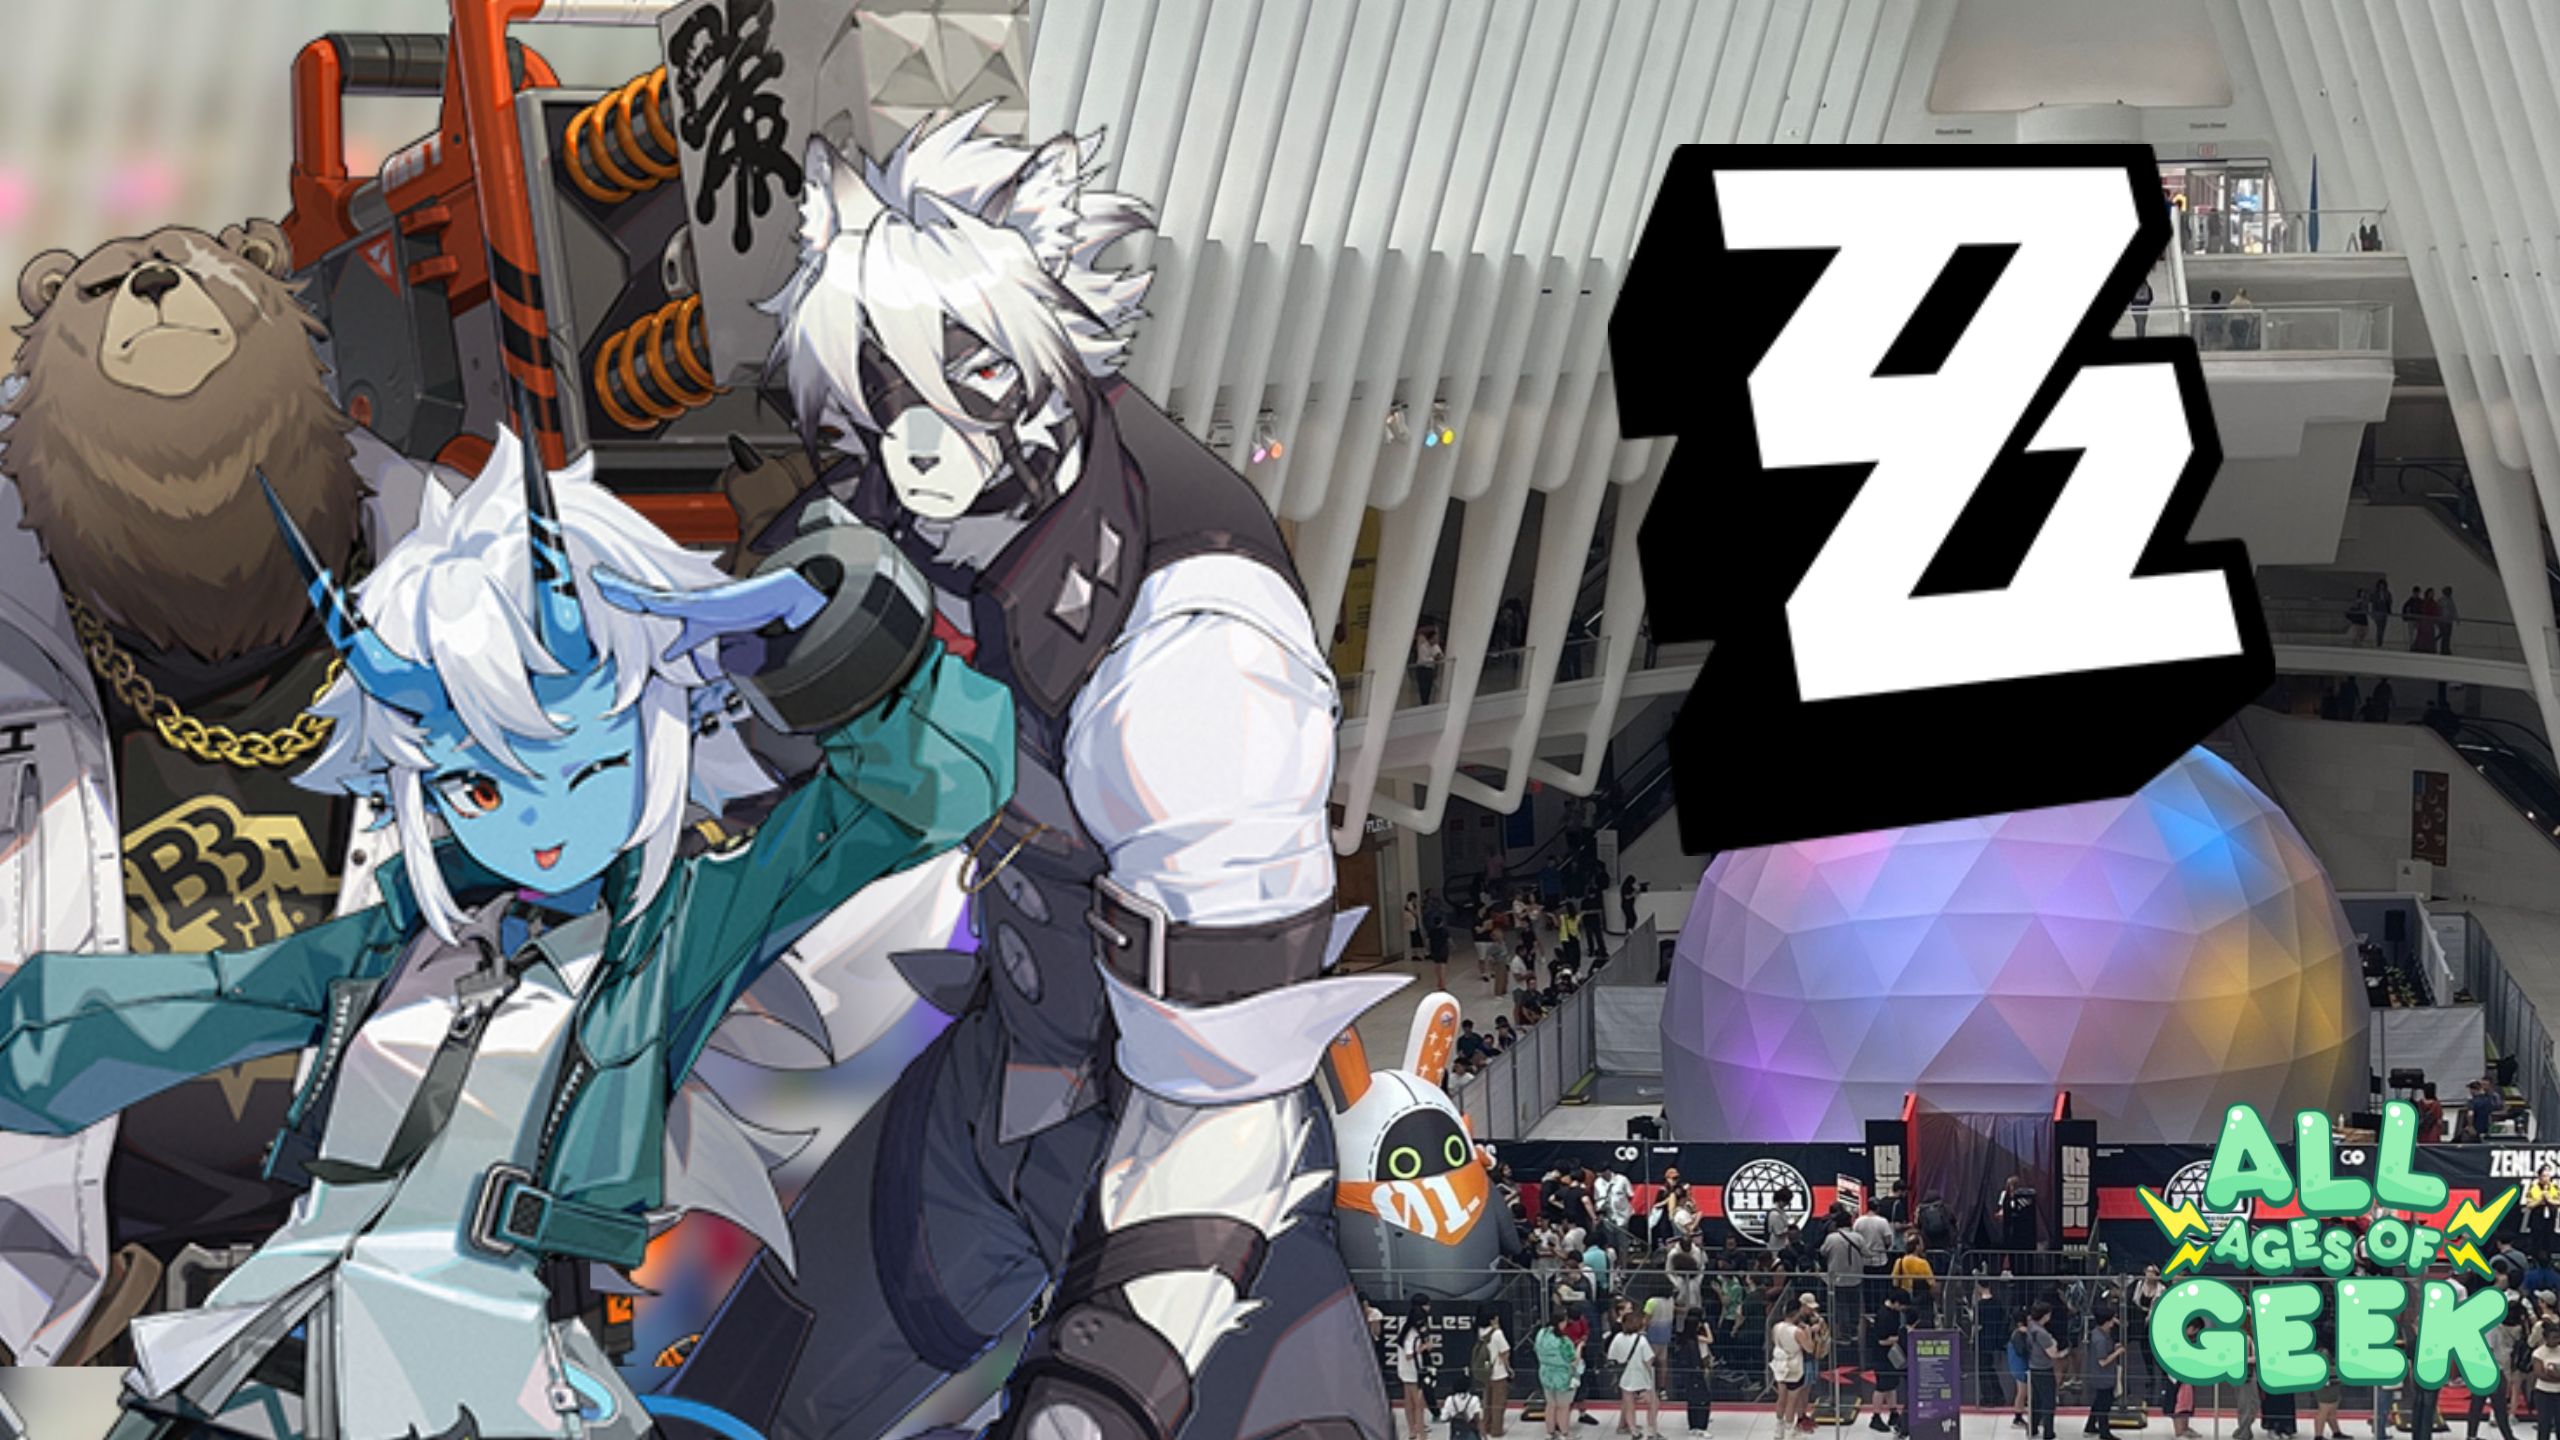 Zenless Zone Zero 'Hollow Sighting in New York' Pop-up Event. The image features characters from Zenless Zone Zero, including a blue-skinned character with horns, a bear, and a wolf-like character. In the background, there is a colorful dome structure with people gathered around, indicating a lively event. The Zenless Zone Zero logo is prominently displayed, along with the All Ages of Geek logo at the bottom right corner